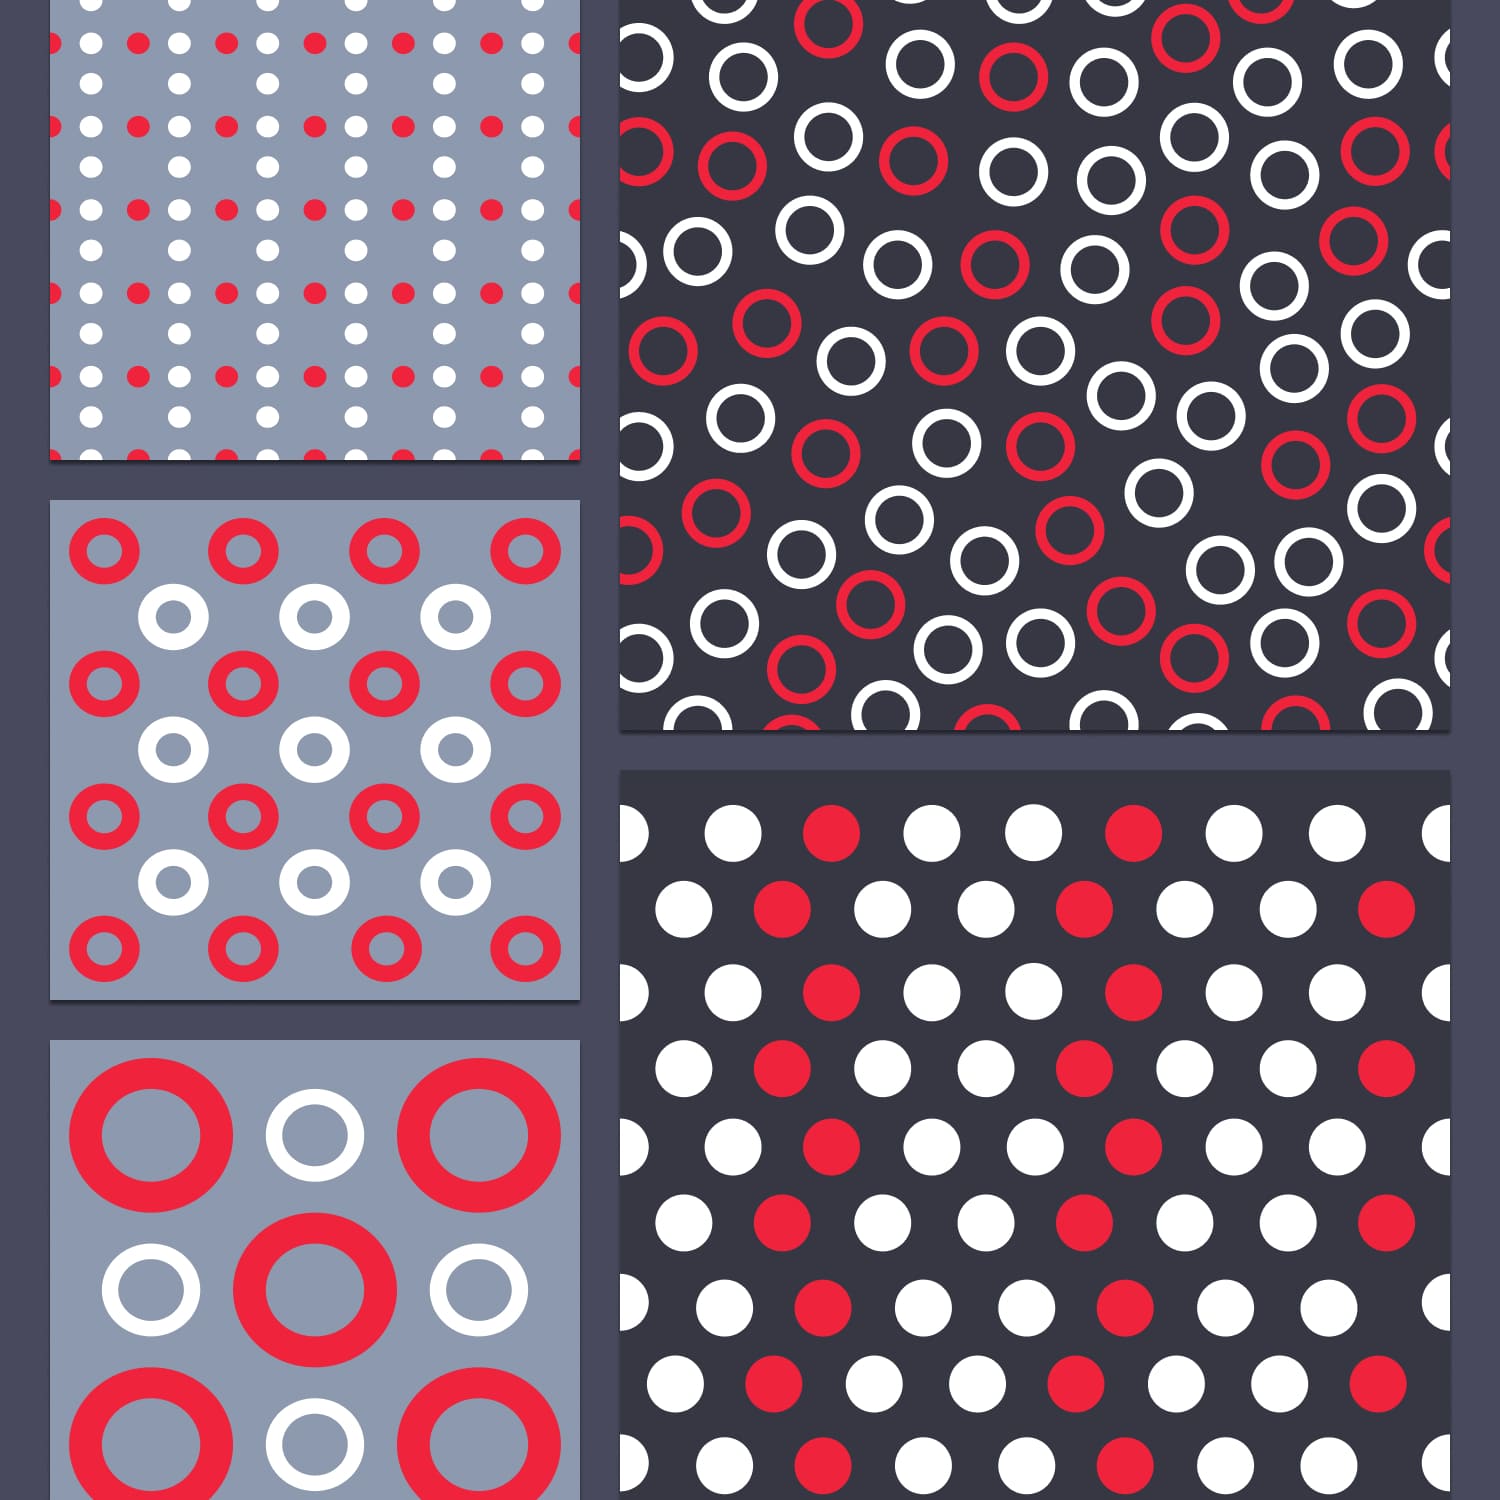 red and white polka dot patterns cover.